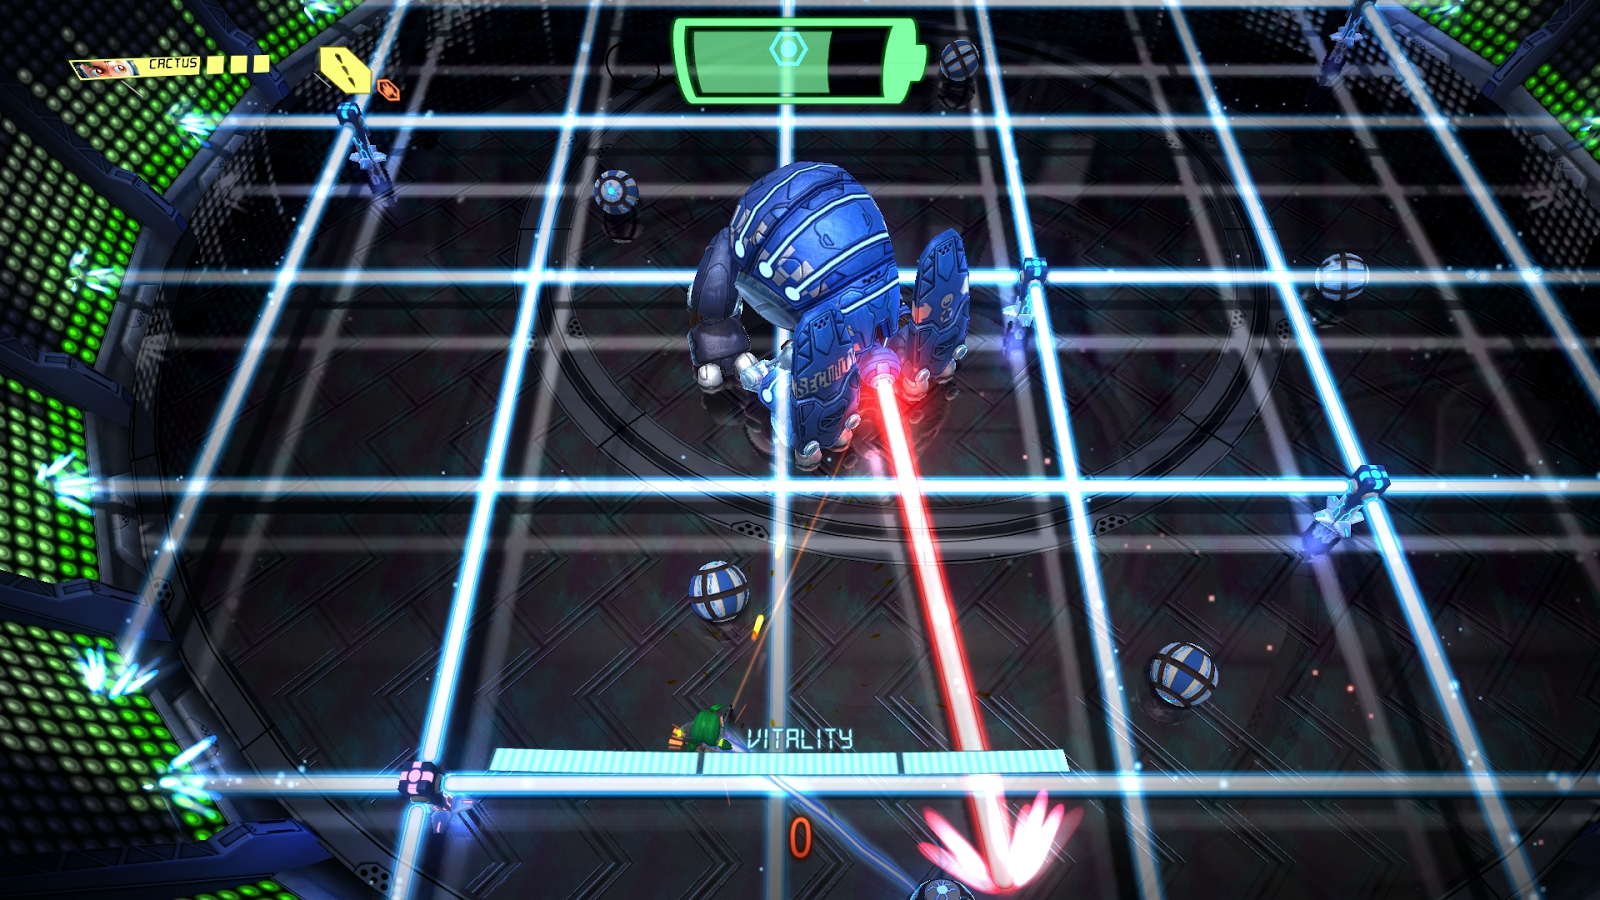 download assault cactus for free